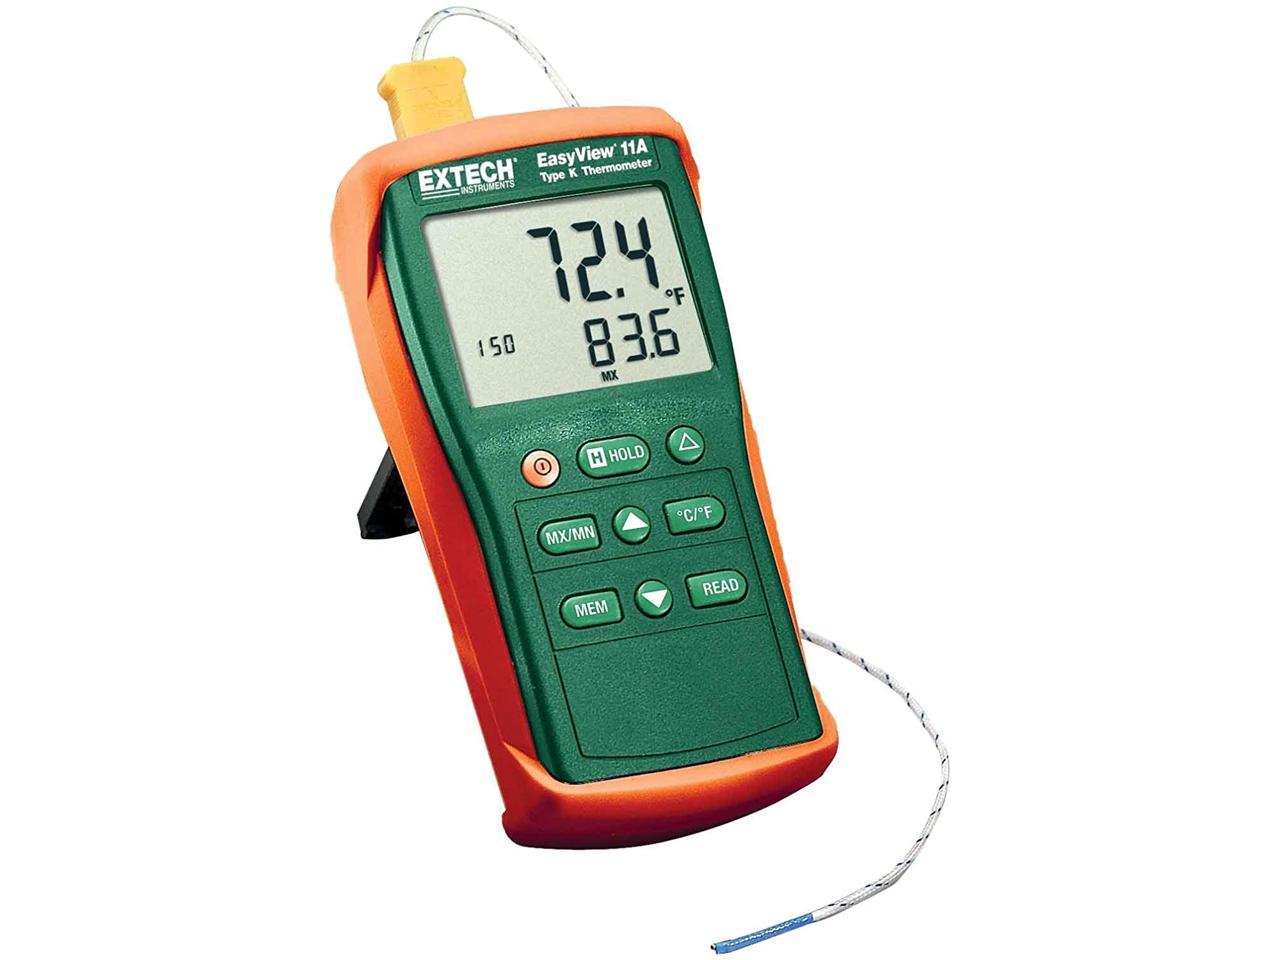 Extech EA11A Easy View Type K Single Input Thermometer - Newegg.com